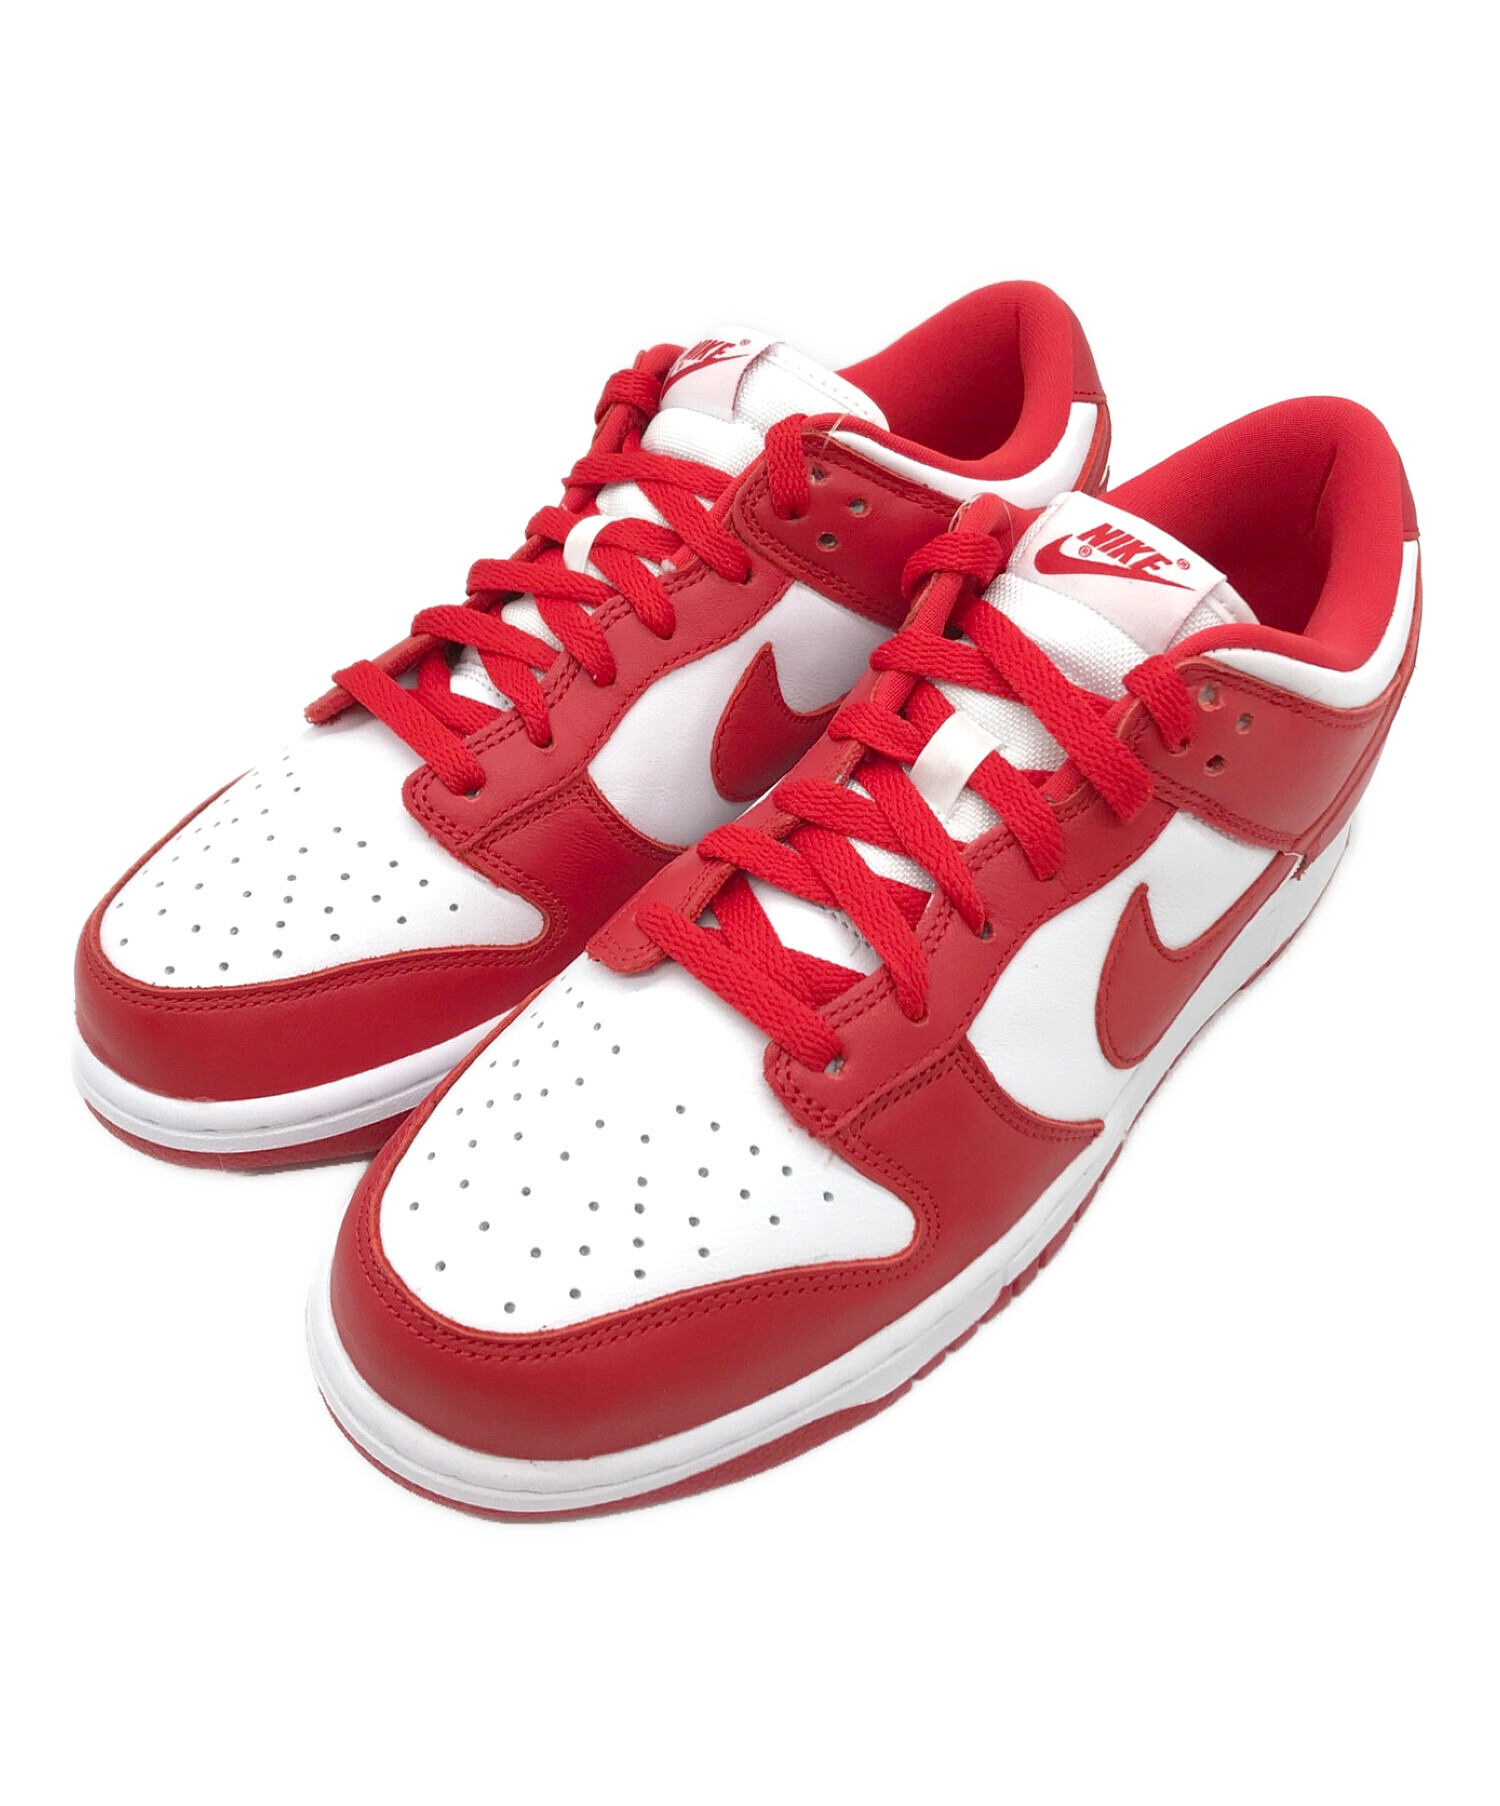 NIKE DUNK LOW SP university red 27.5